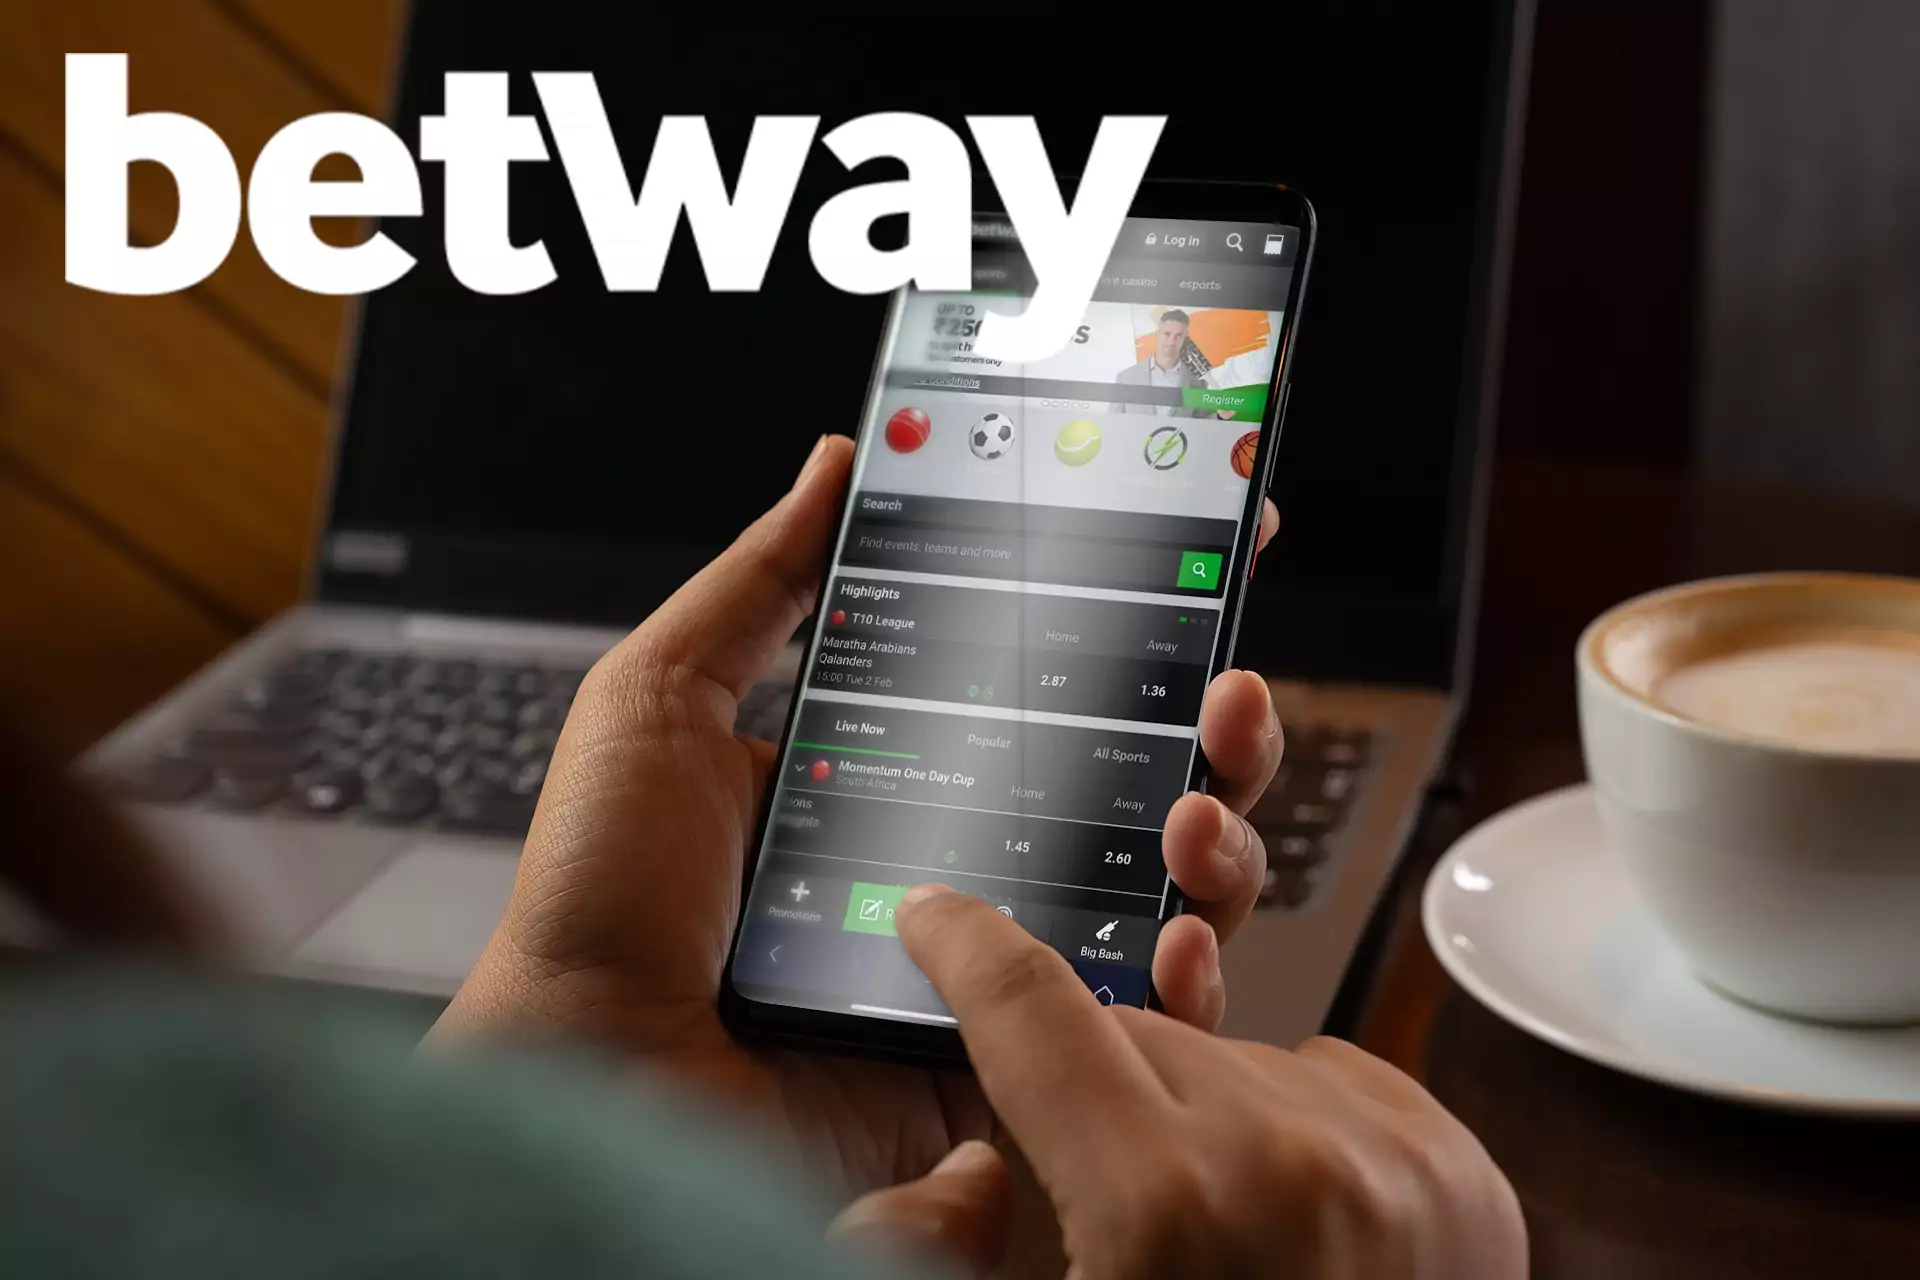 Find out the system requirements for the Betway mobile site.